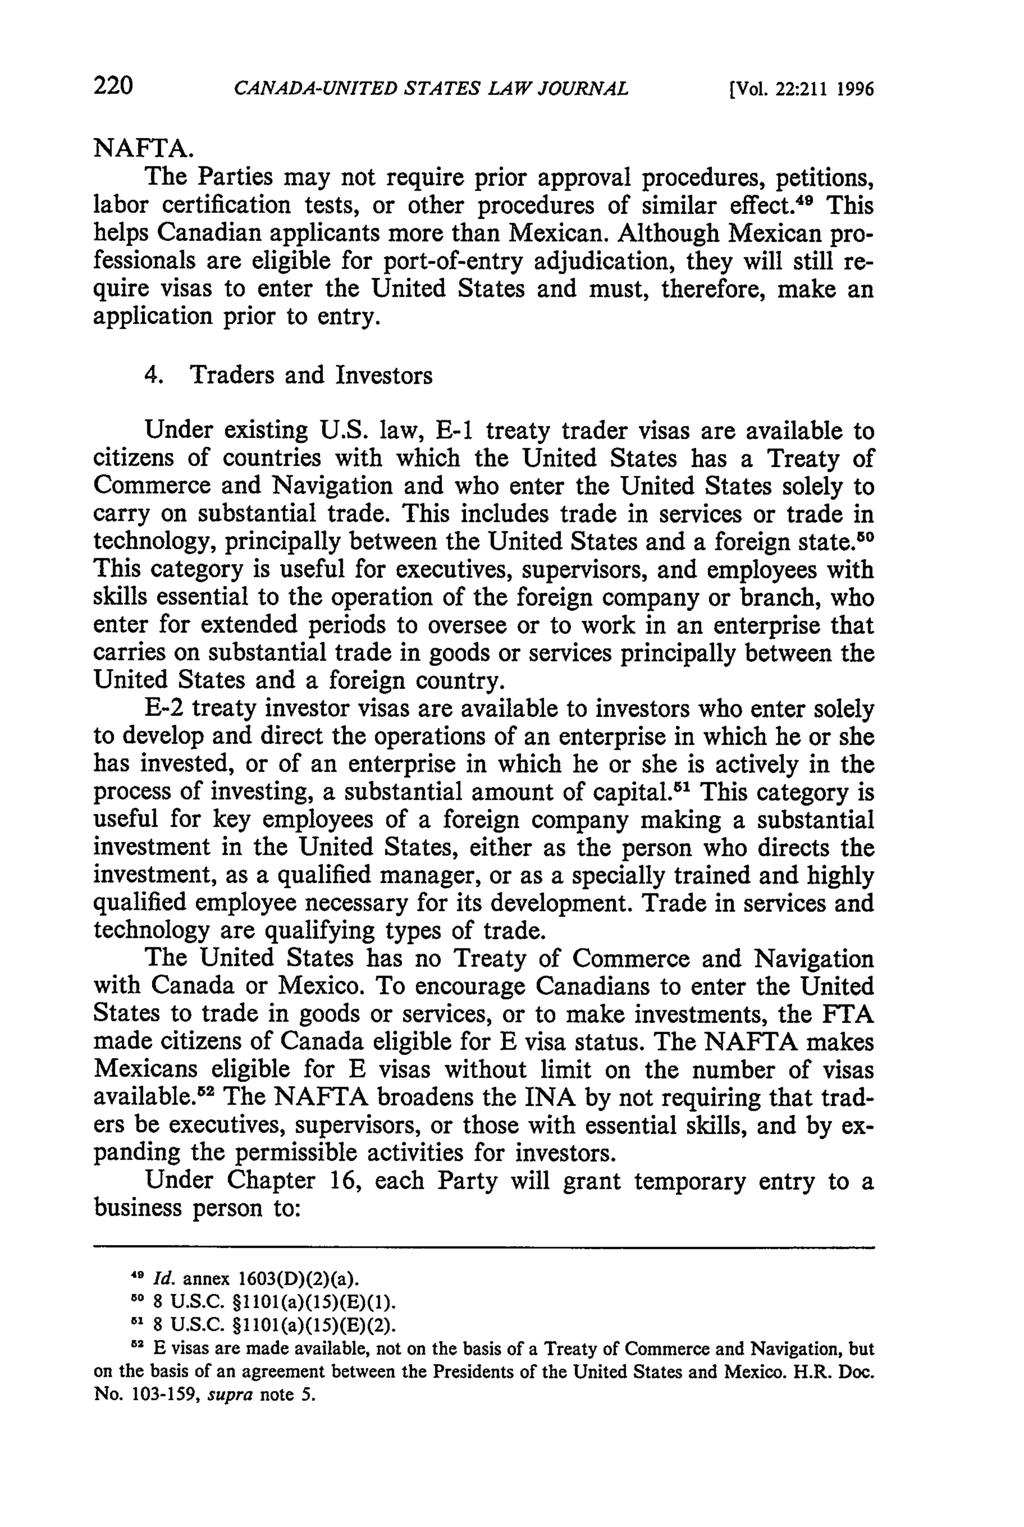 Canada-United States Law Journal, Vol. 22 [1996], Iss., Art. 30 CANADA-UNITED STATES LAW JOURNAL [Vol. 22:211 1996 NAFTA.